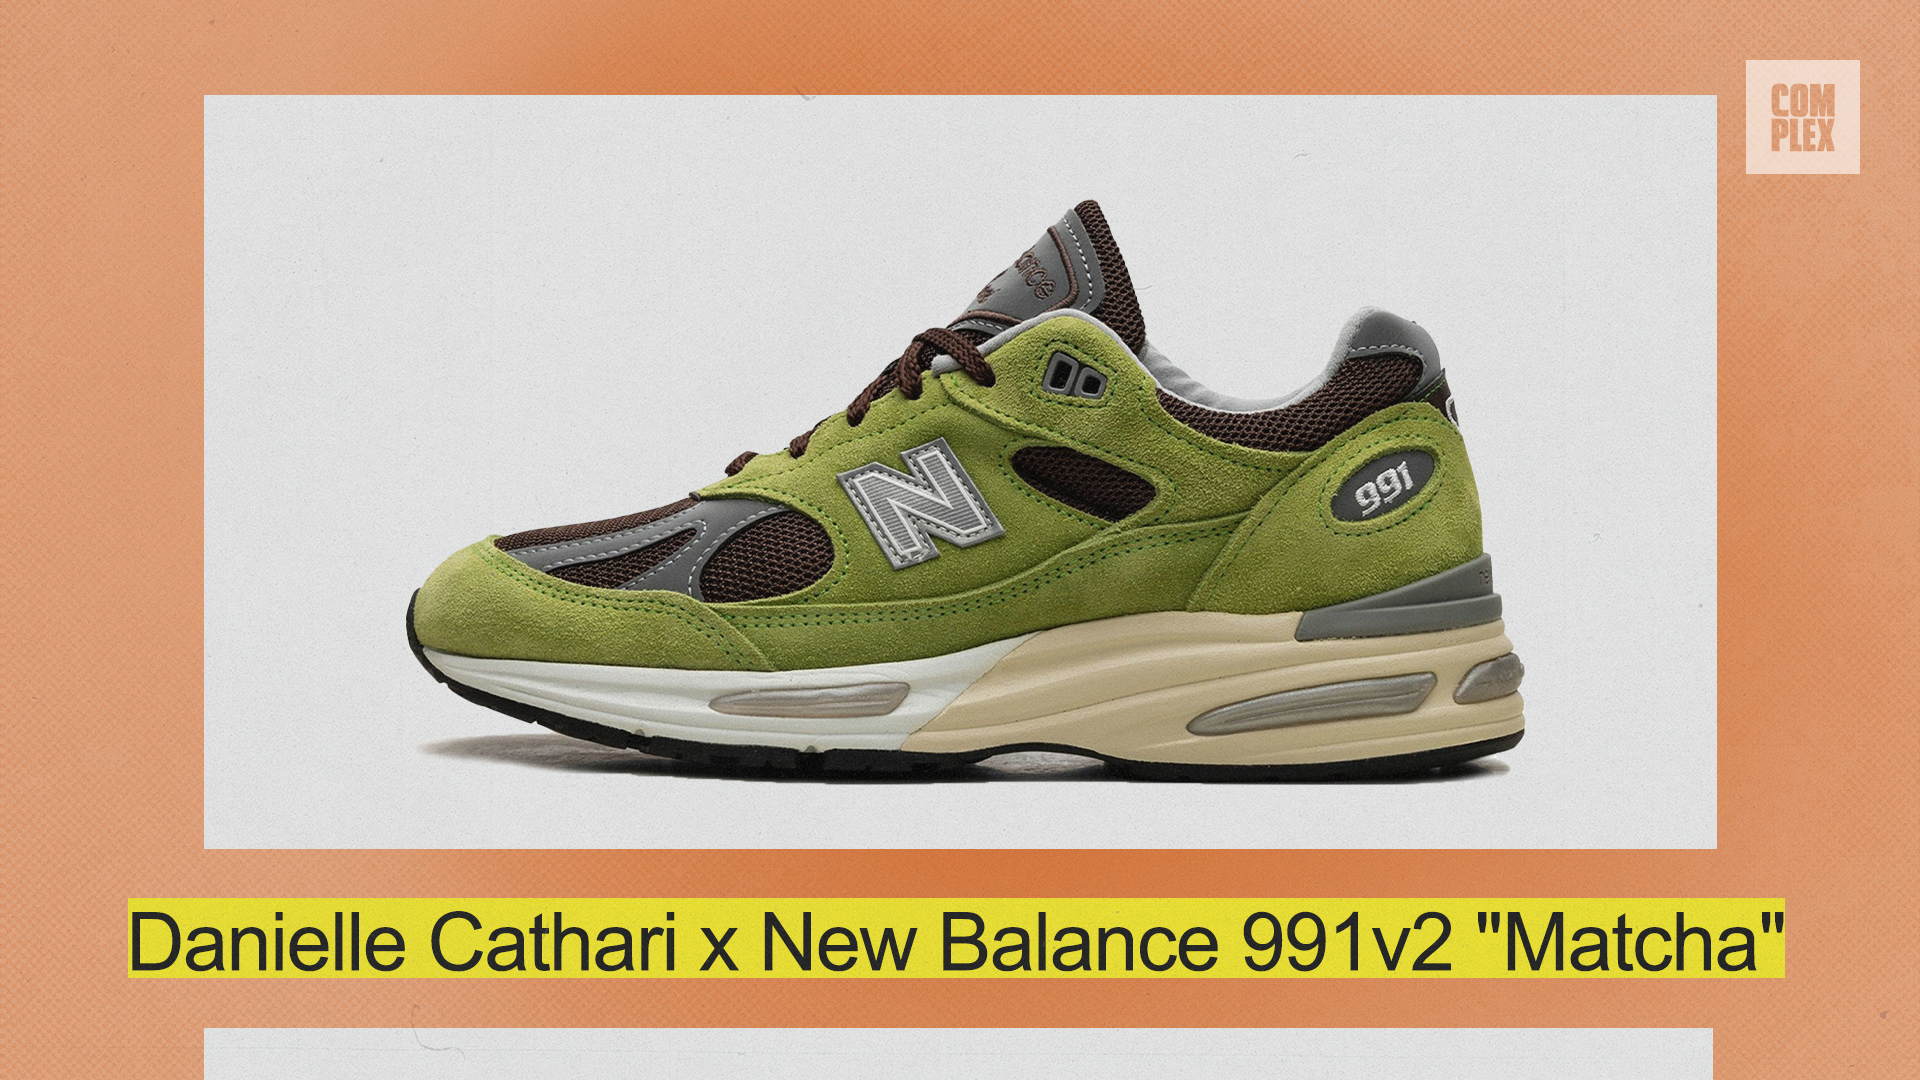 Danielle Cathari x New Balance 991v2 &quot;Matcha&quot; sneaker with green and gray details, featured in Complex article